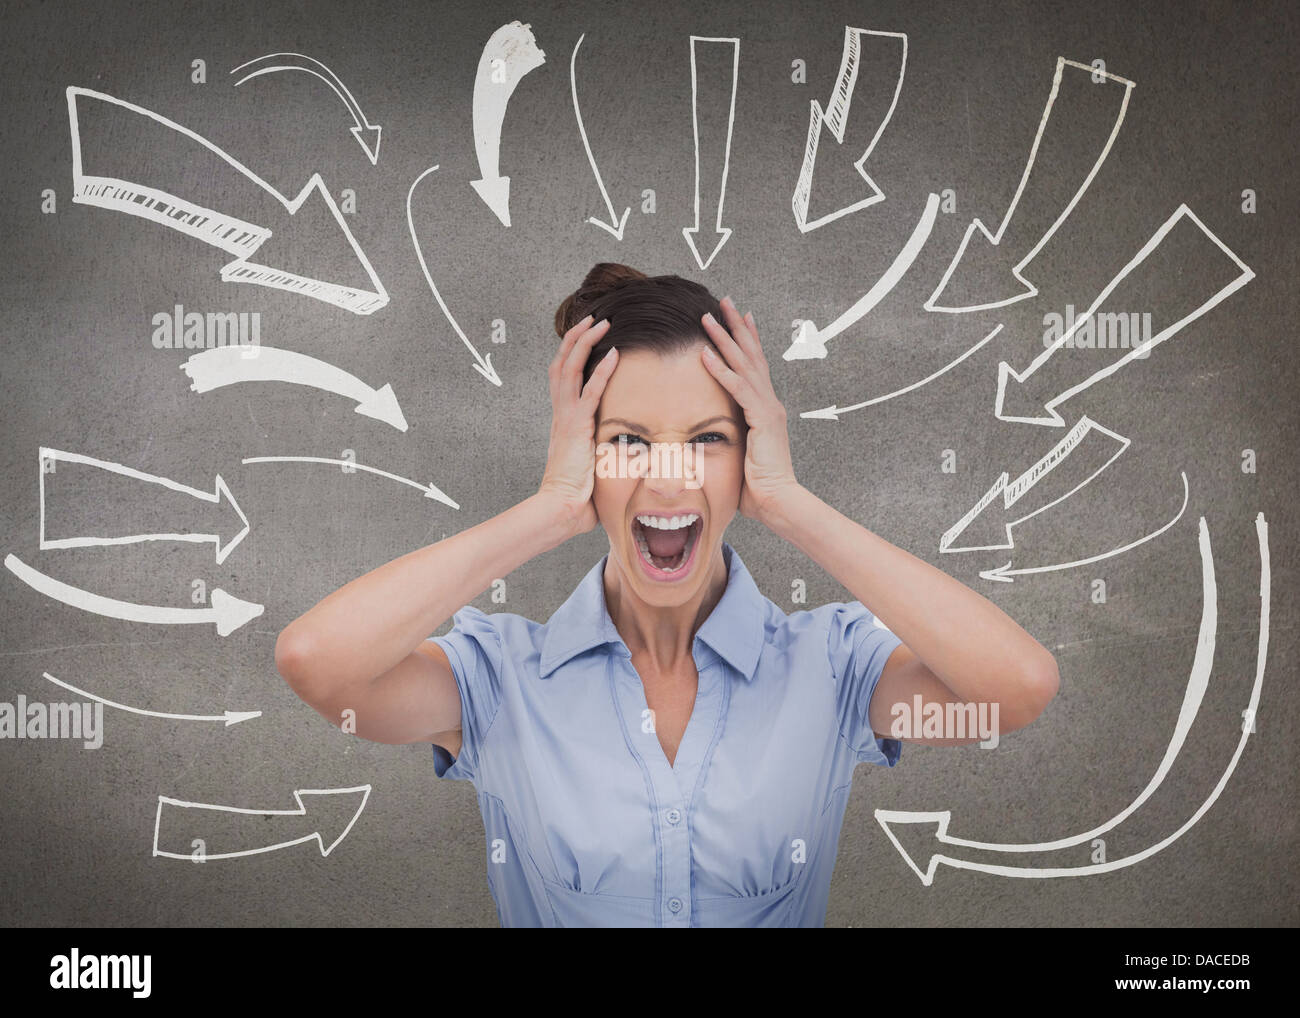 Sophisticated businesswoman screaming Stock Photo